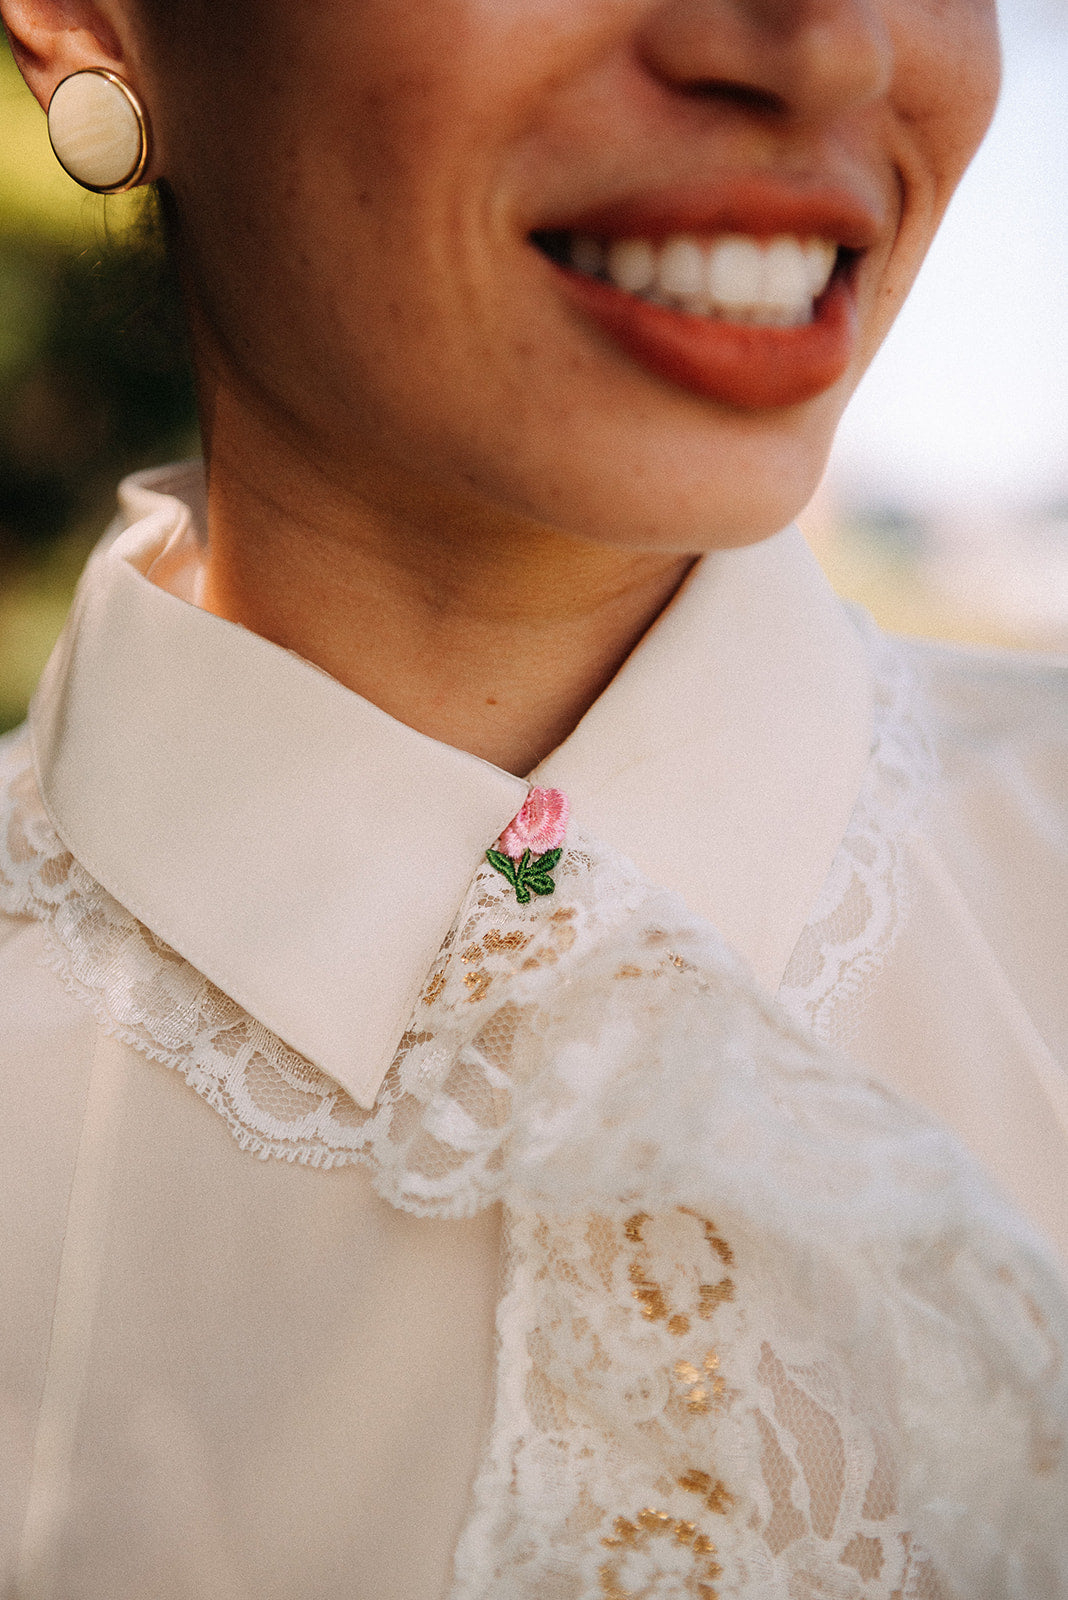 Marie's Lace Bolo Tie with Rose